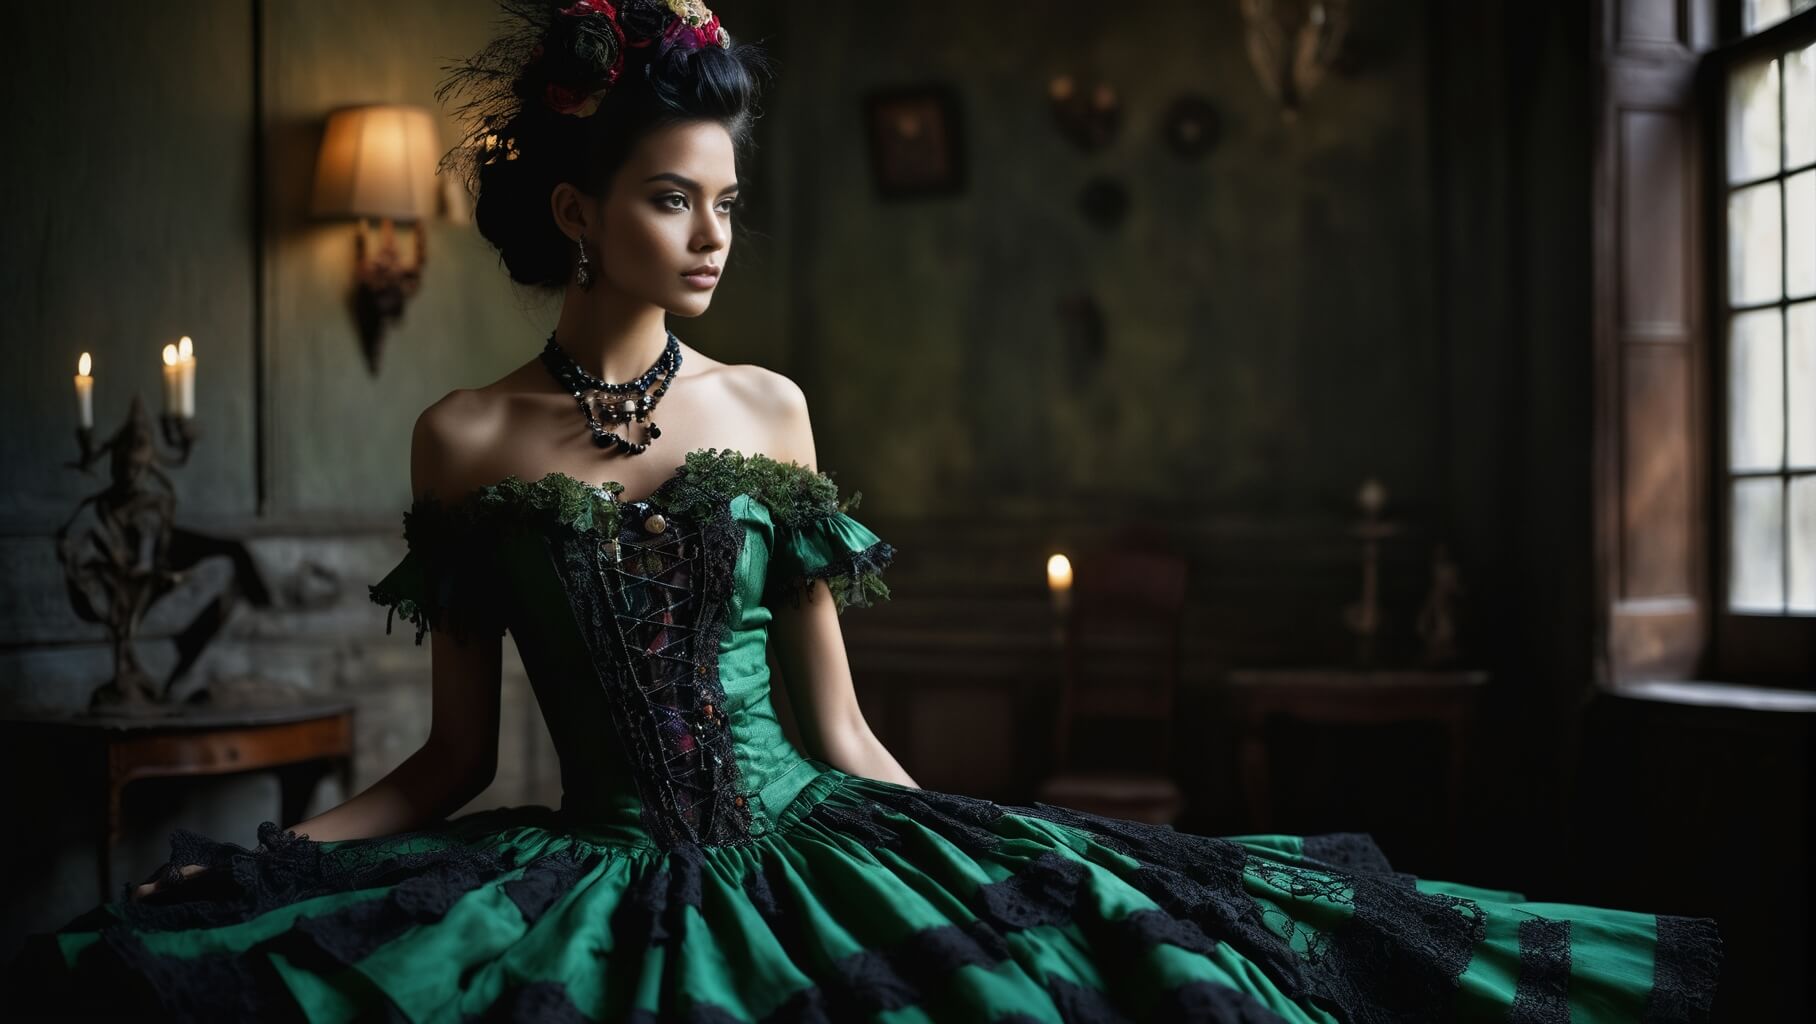 Emerald green bodice with black lace accents